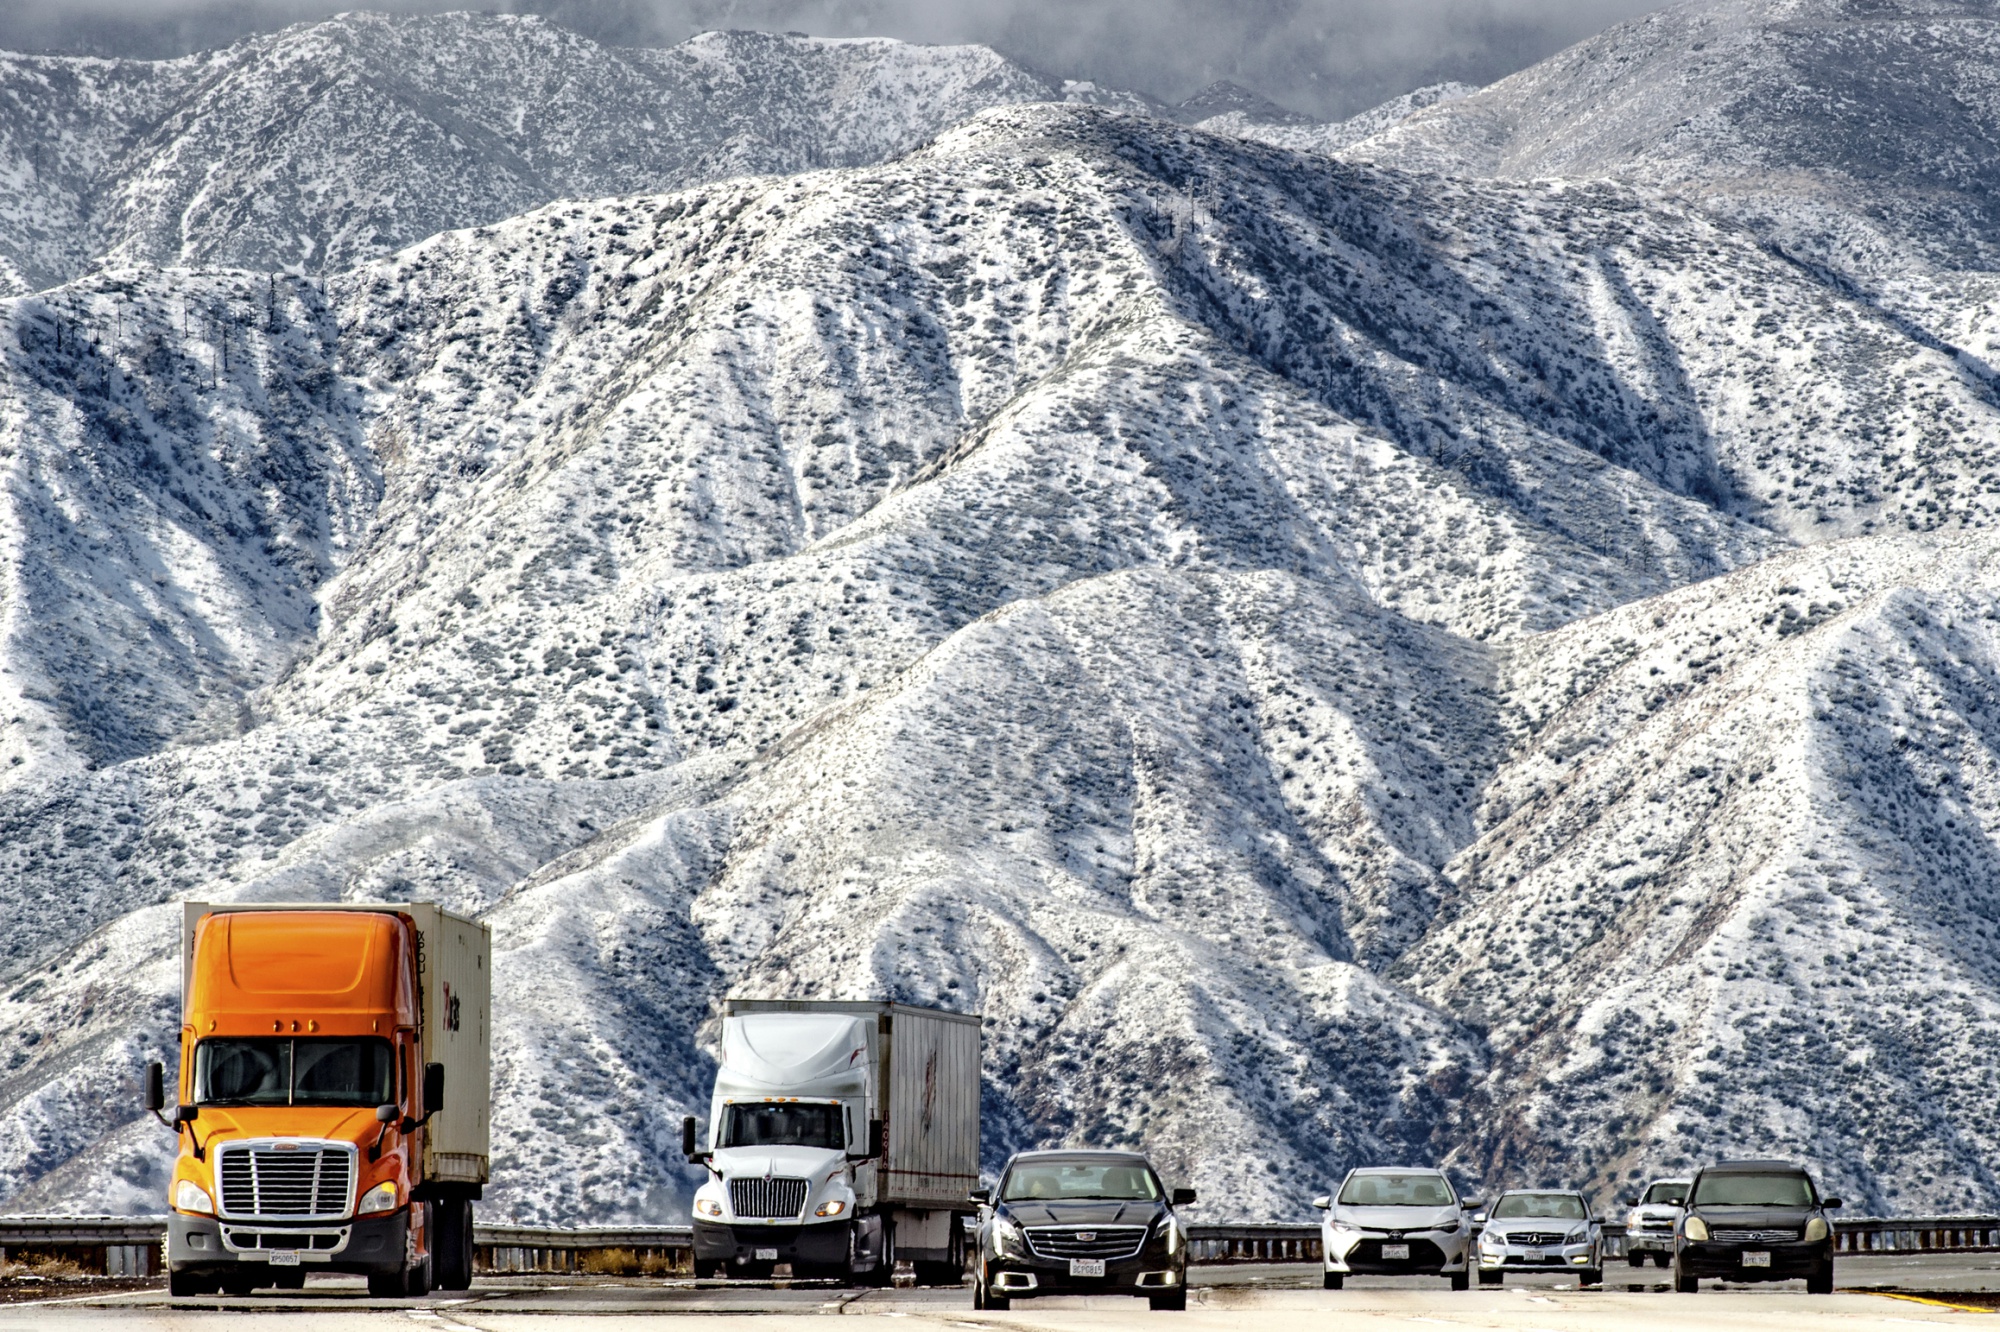 Mountains are blanketed near Hwy 138 in Phelan, California on Feb. 21.